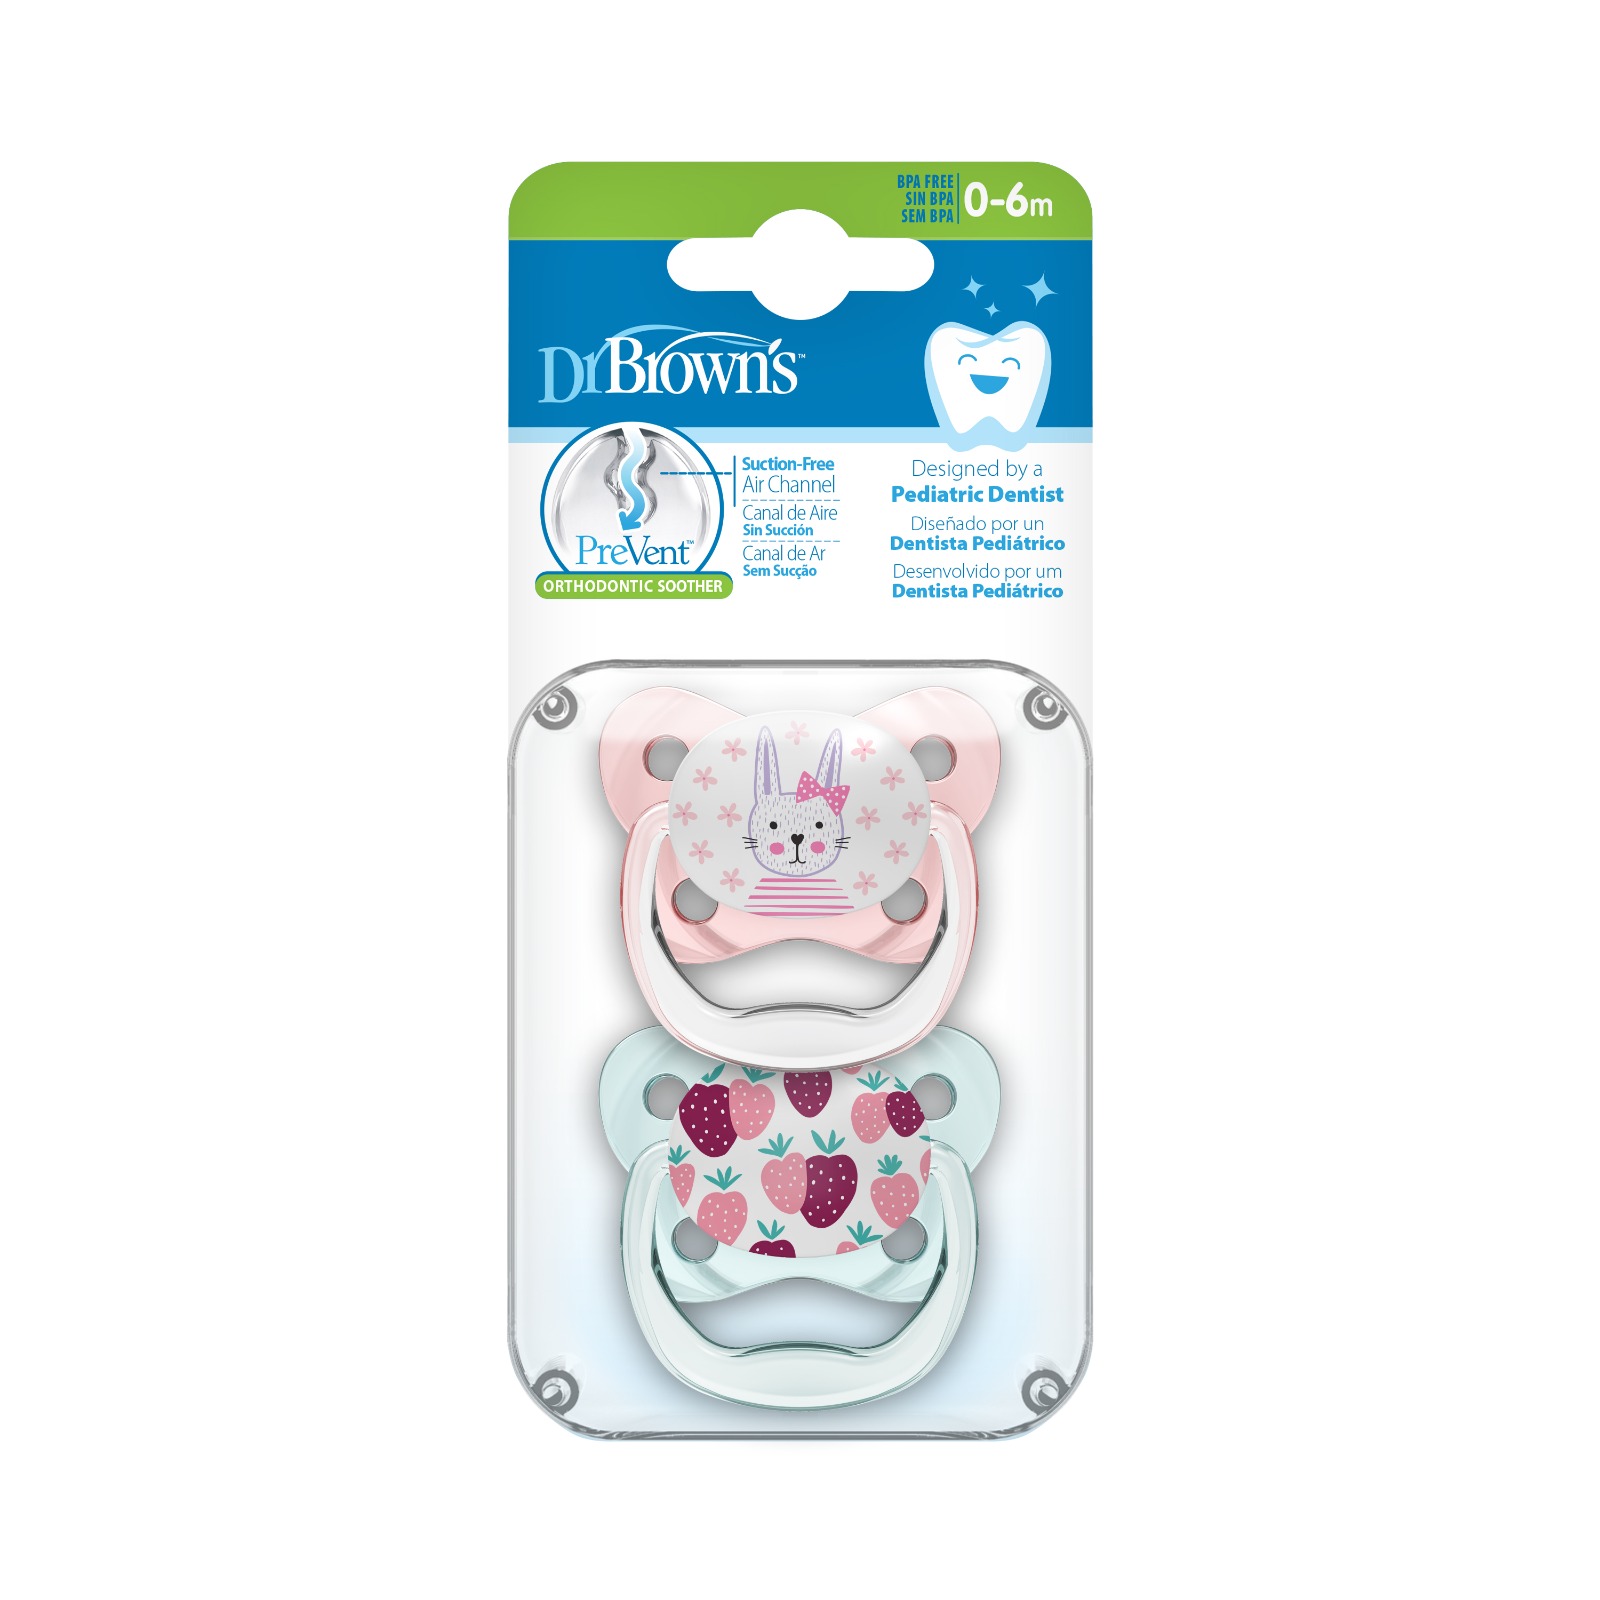 Dr Browns Prevent Butterfly Shield Pacifier, 2pcs